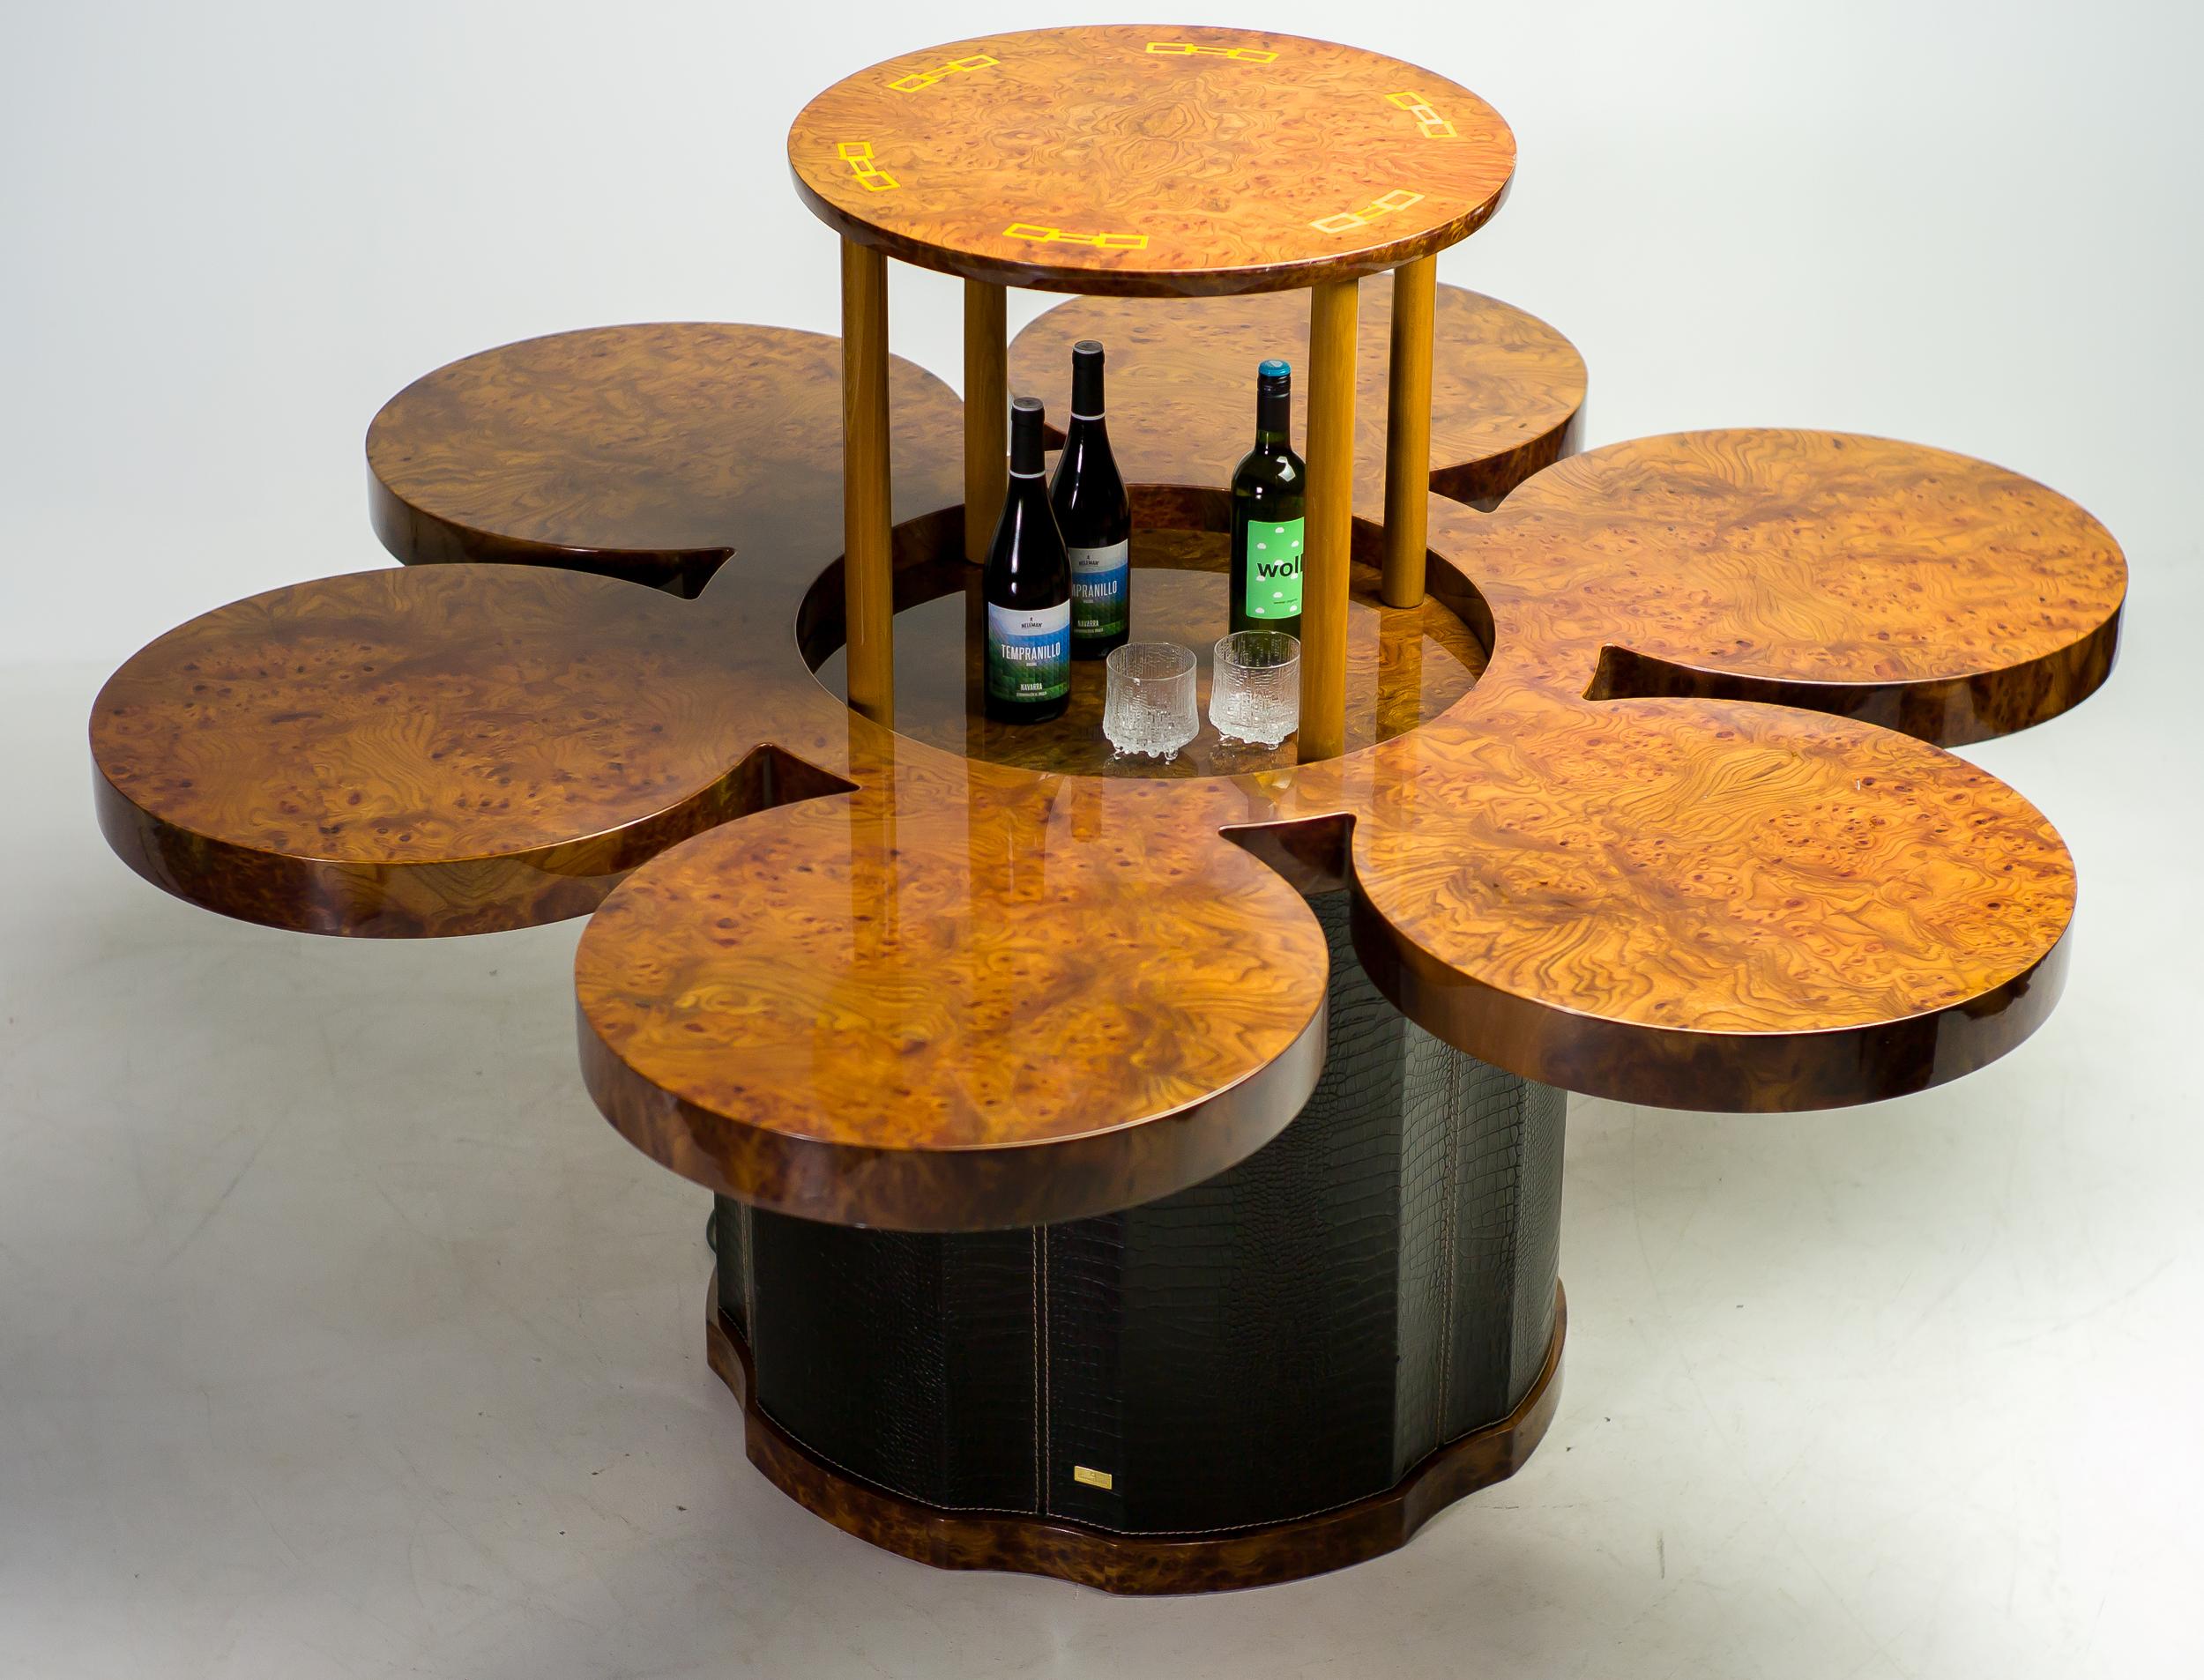 One-off dining table by luxury Italian design label Formitalia, with built-in electrical bar lift.
Leather clad base, burl walnut veneered top with yellow inserts. Formitalia is renowned from their collaborations with Aston Martin and